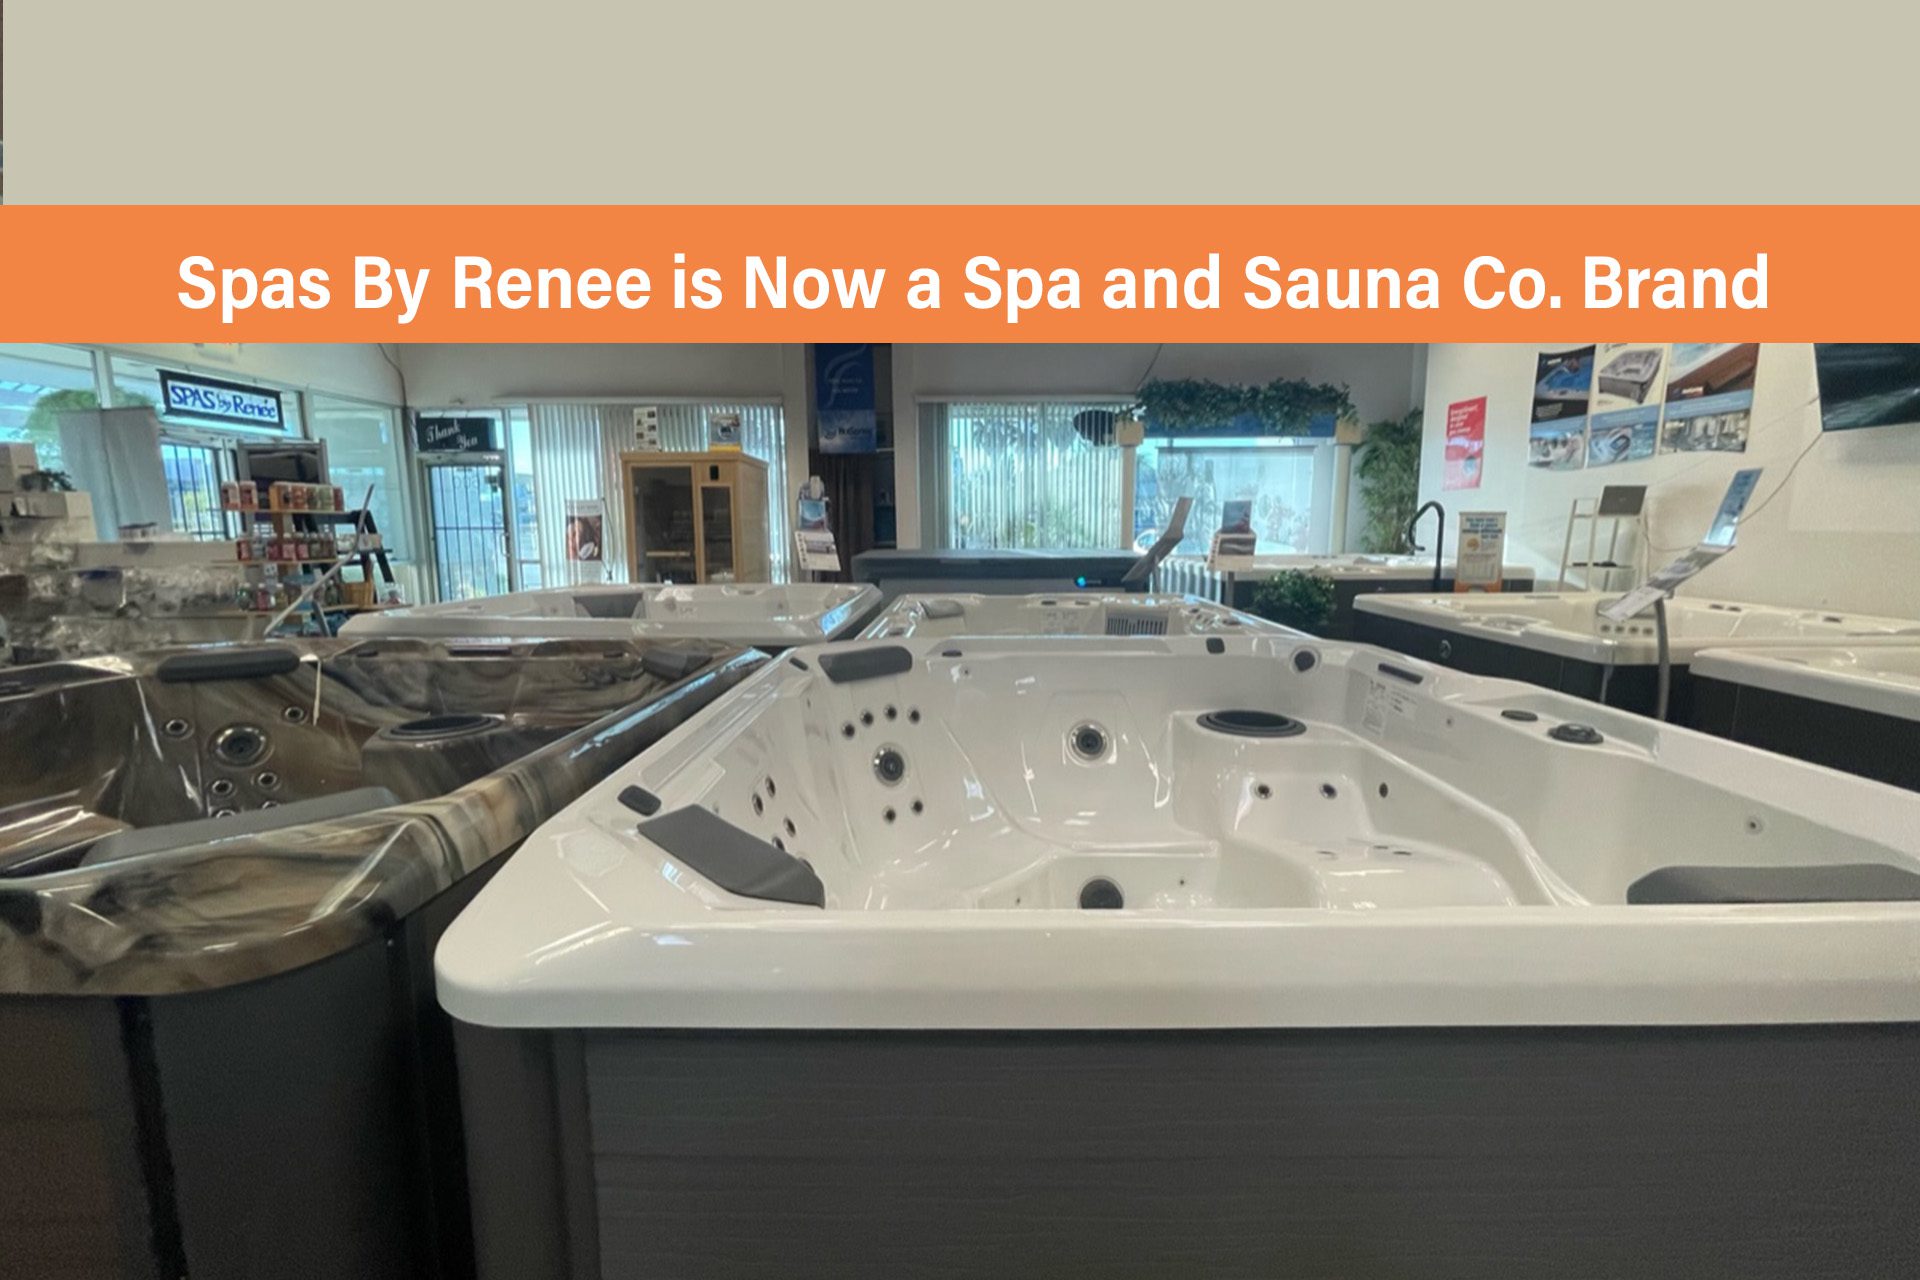 Spas By Renee is Now a Spa and Sauna Co. Brand